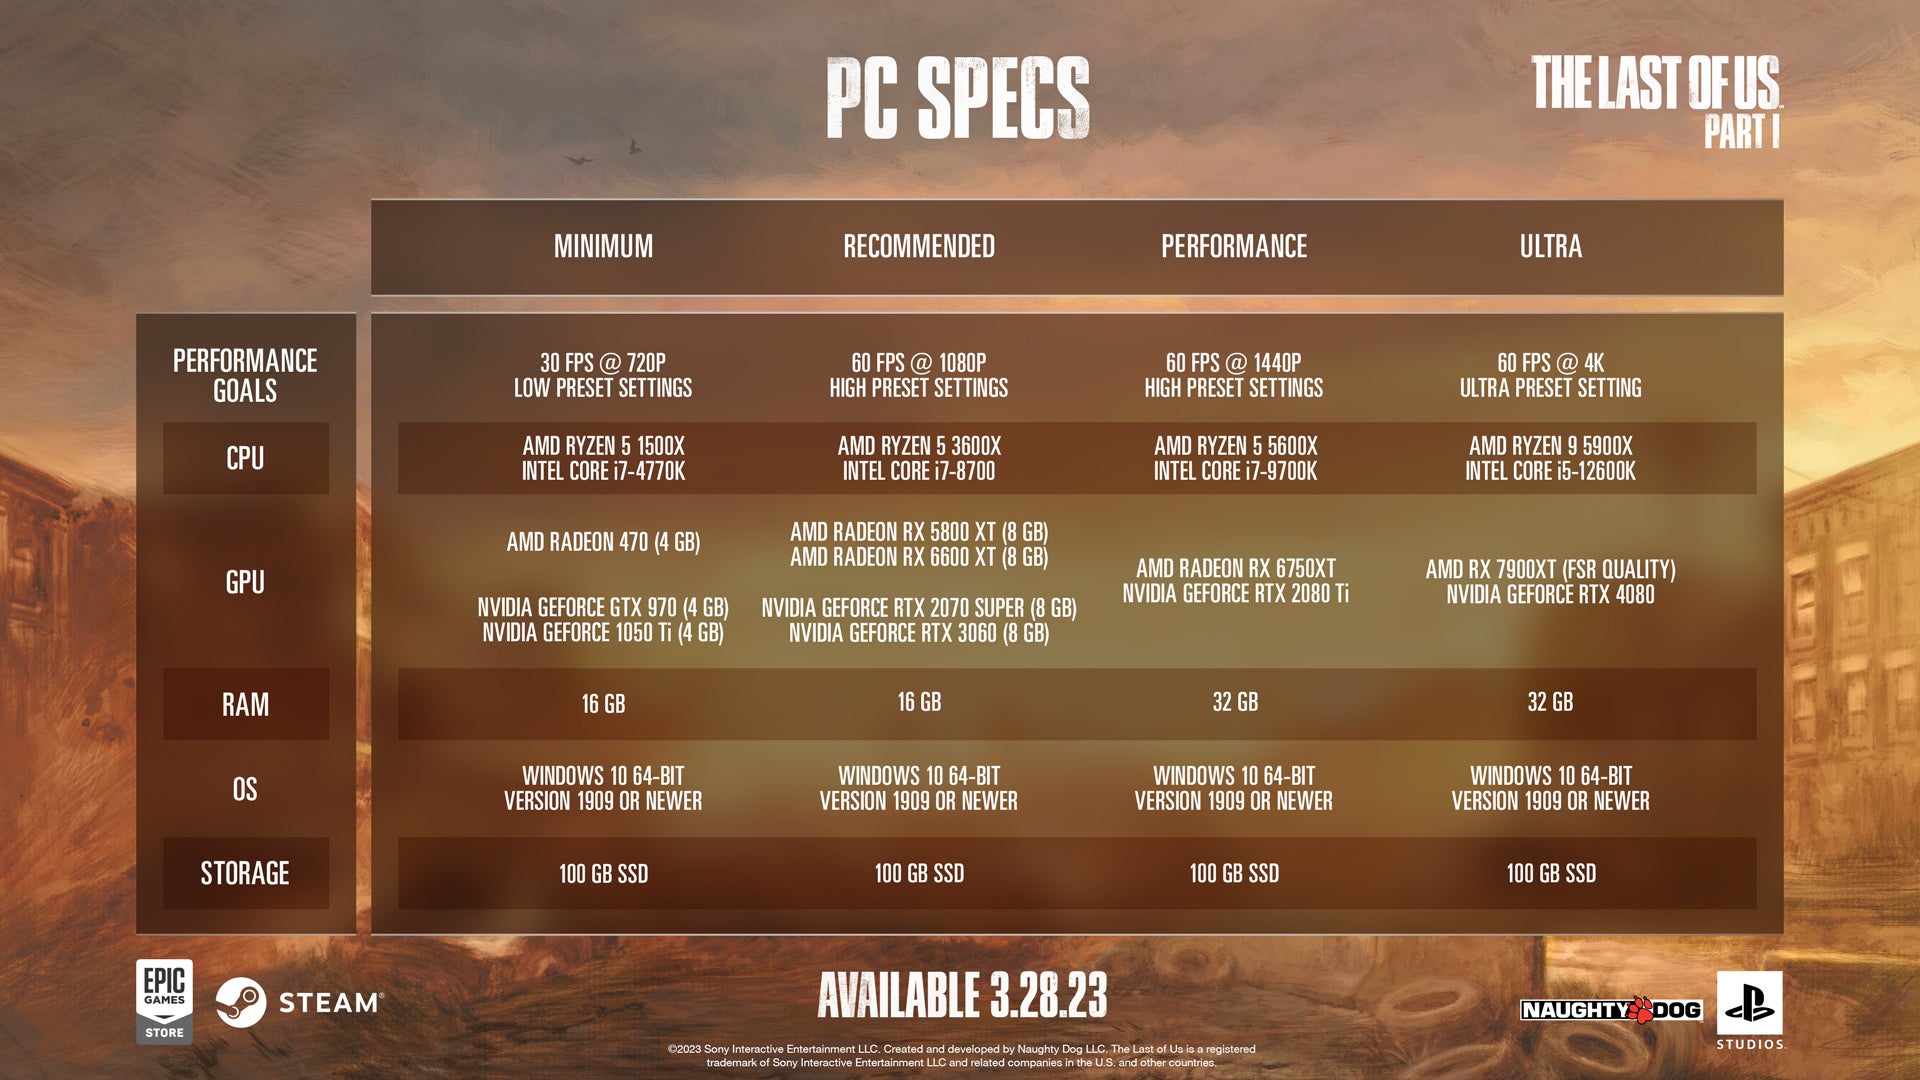 The Final of Us Half I PC options and specs detailed